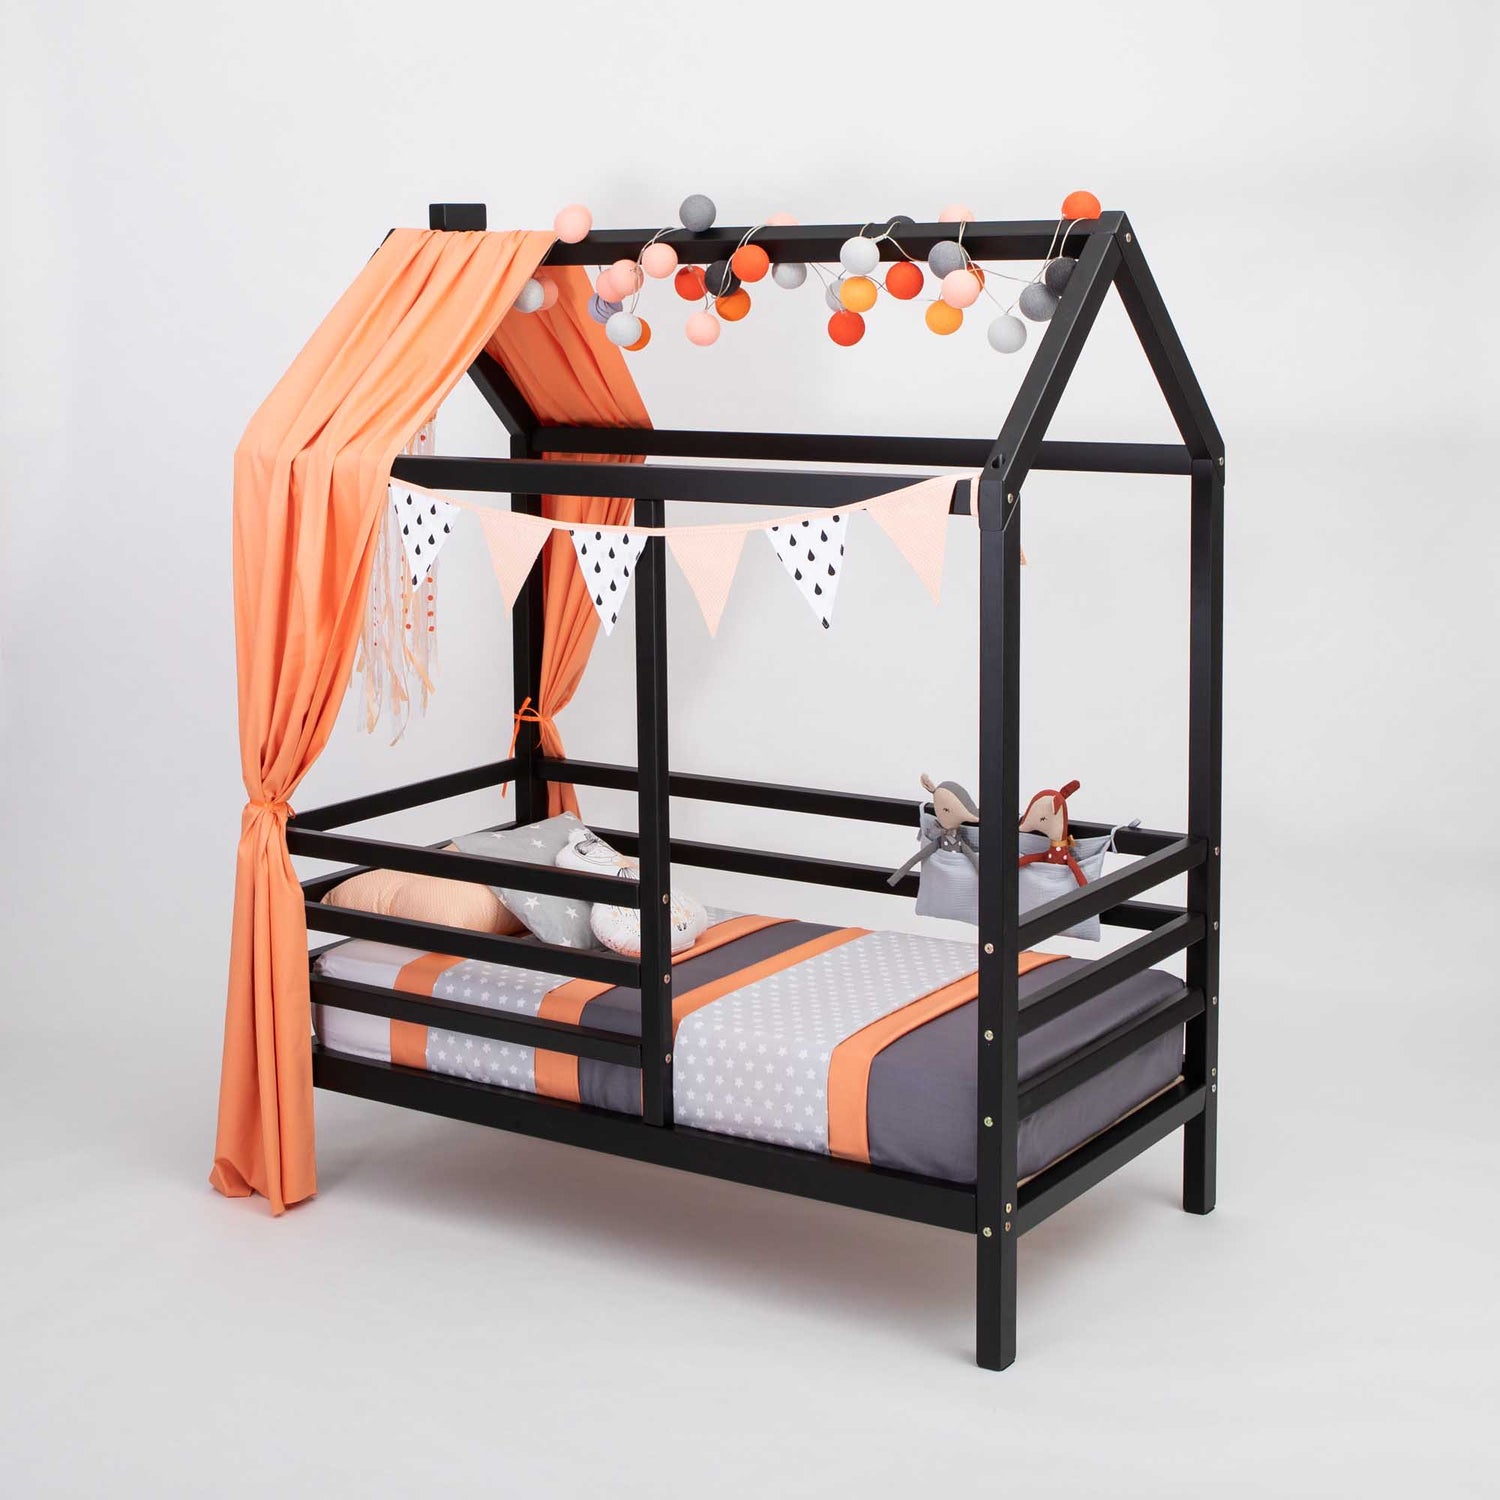 A black and orange wooden house bed on legs with a fence, raised on legs.